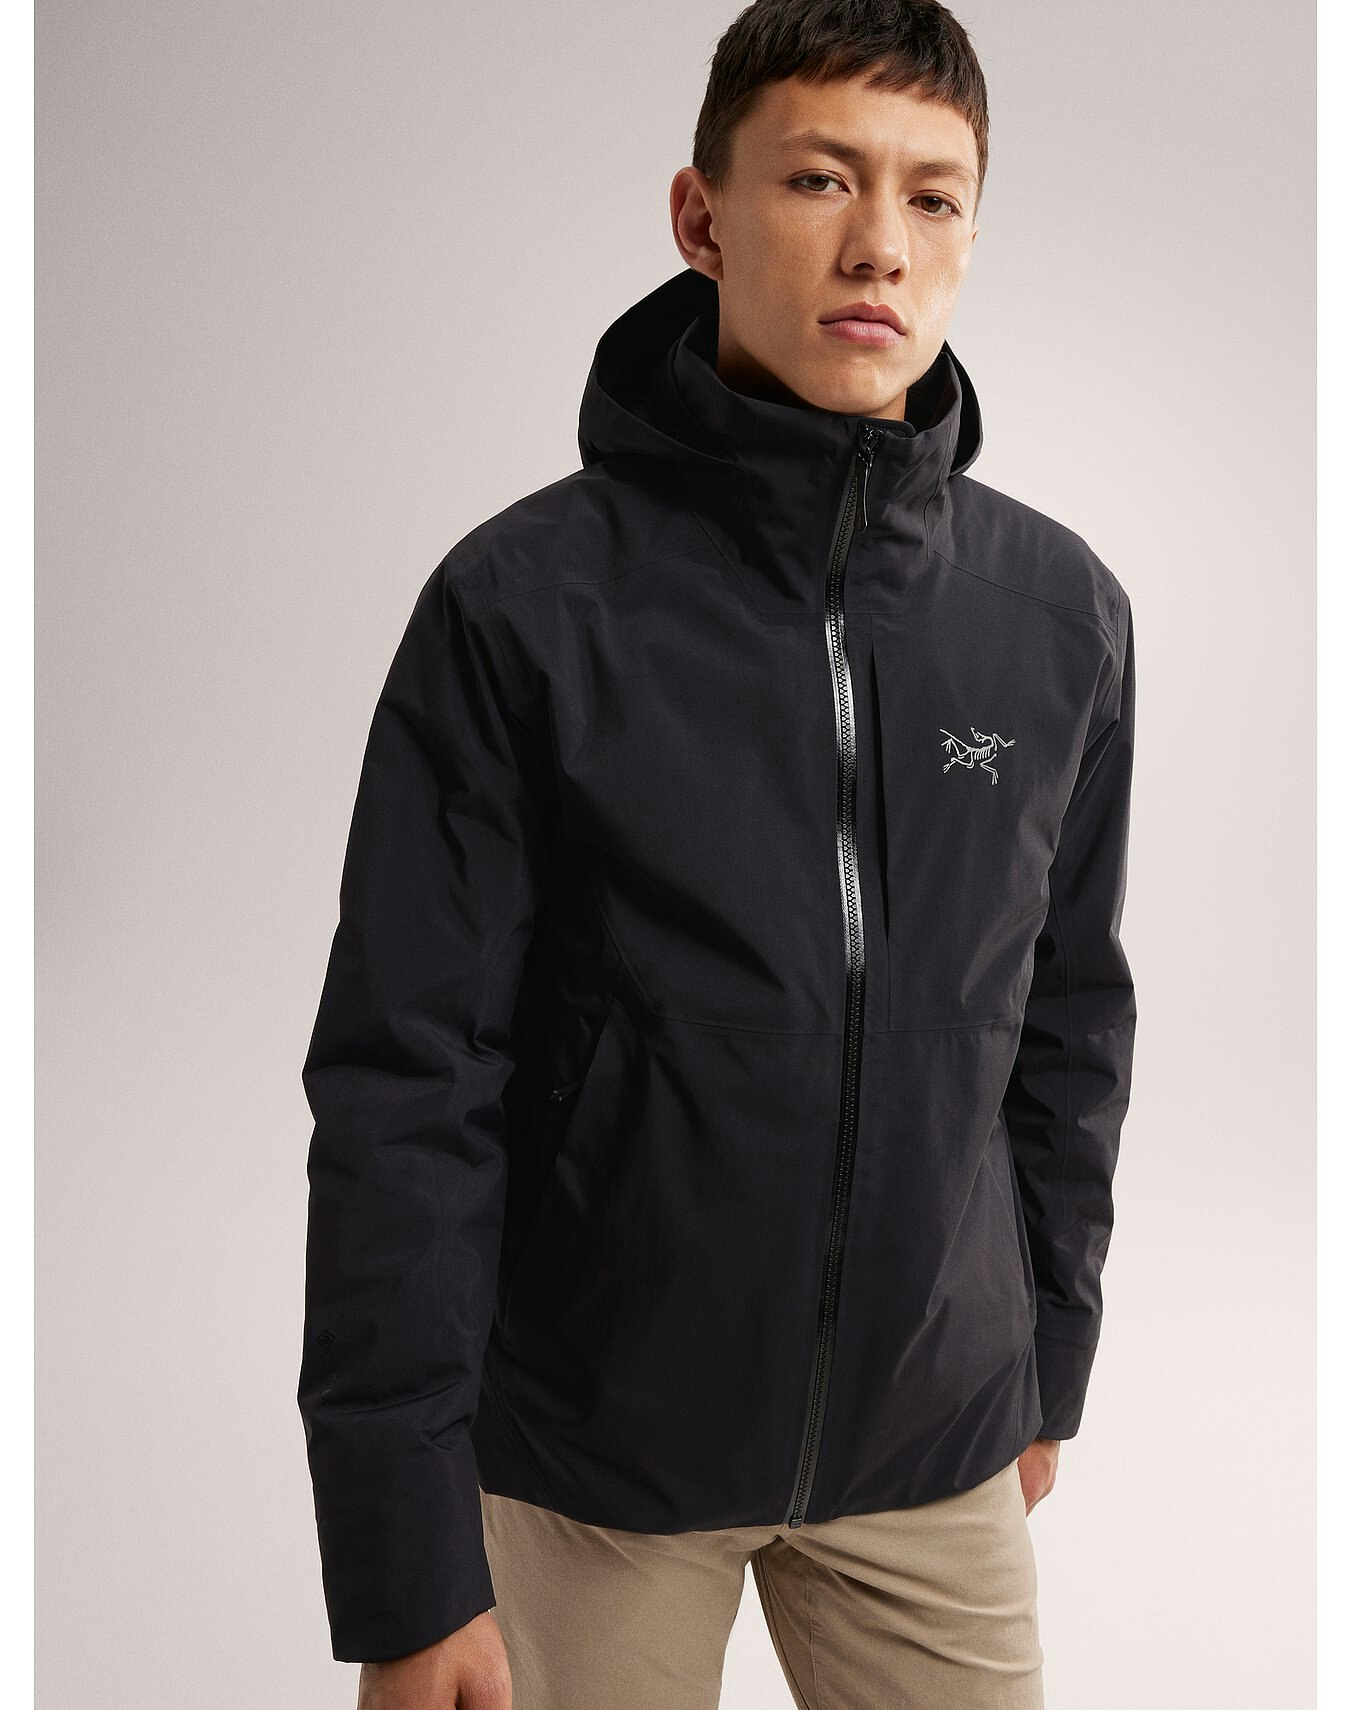 Ralle Insulated Jacket Black